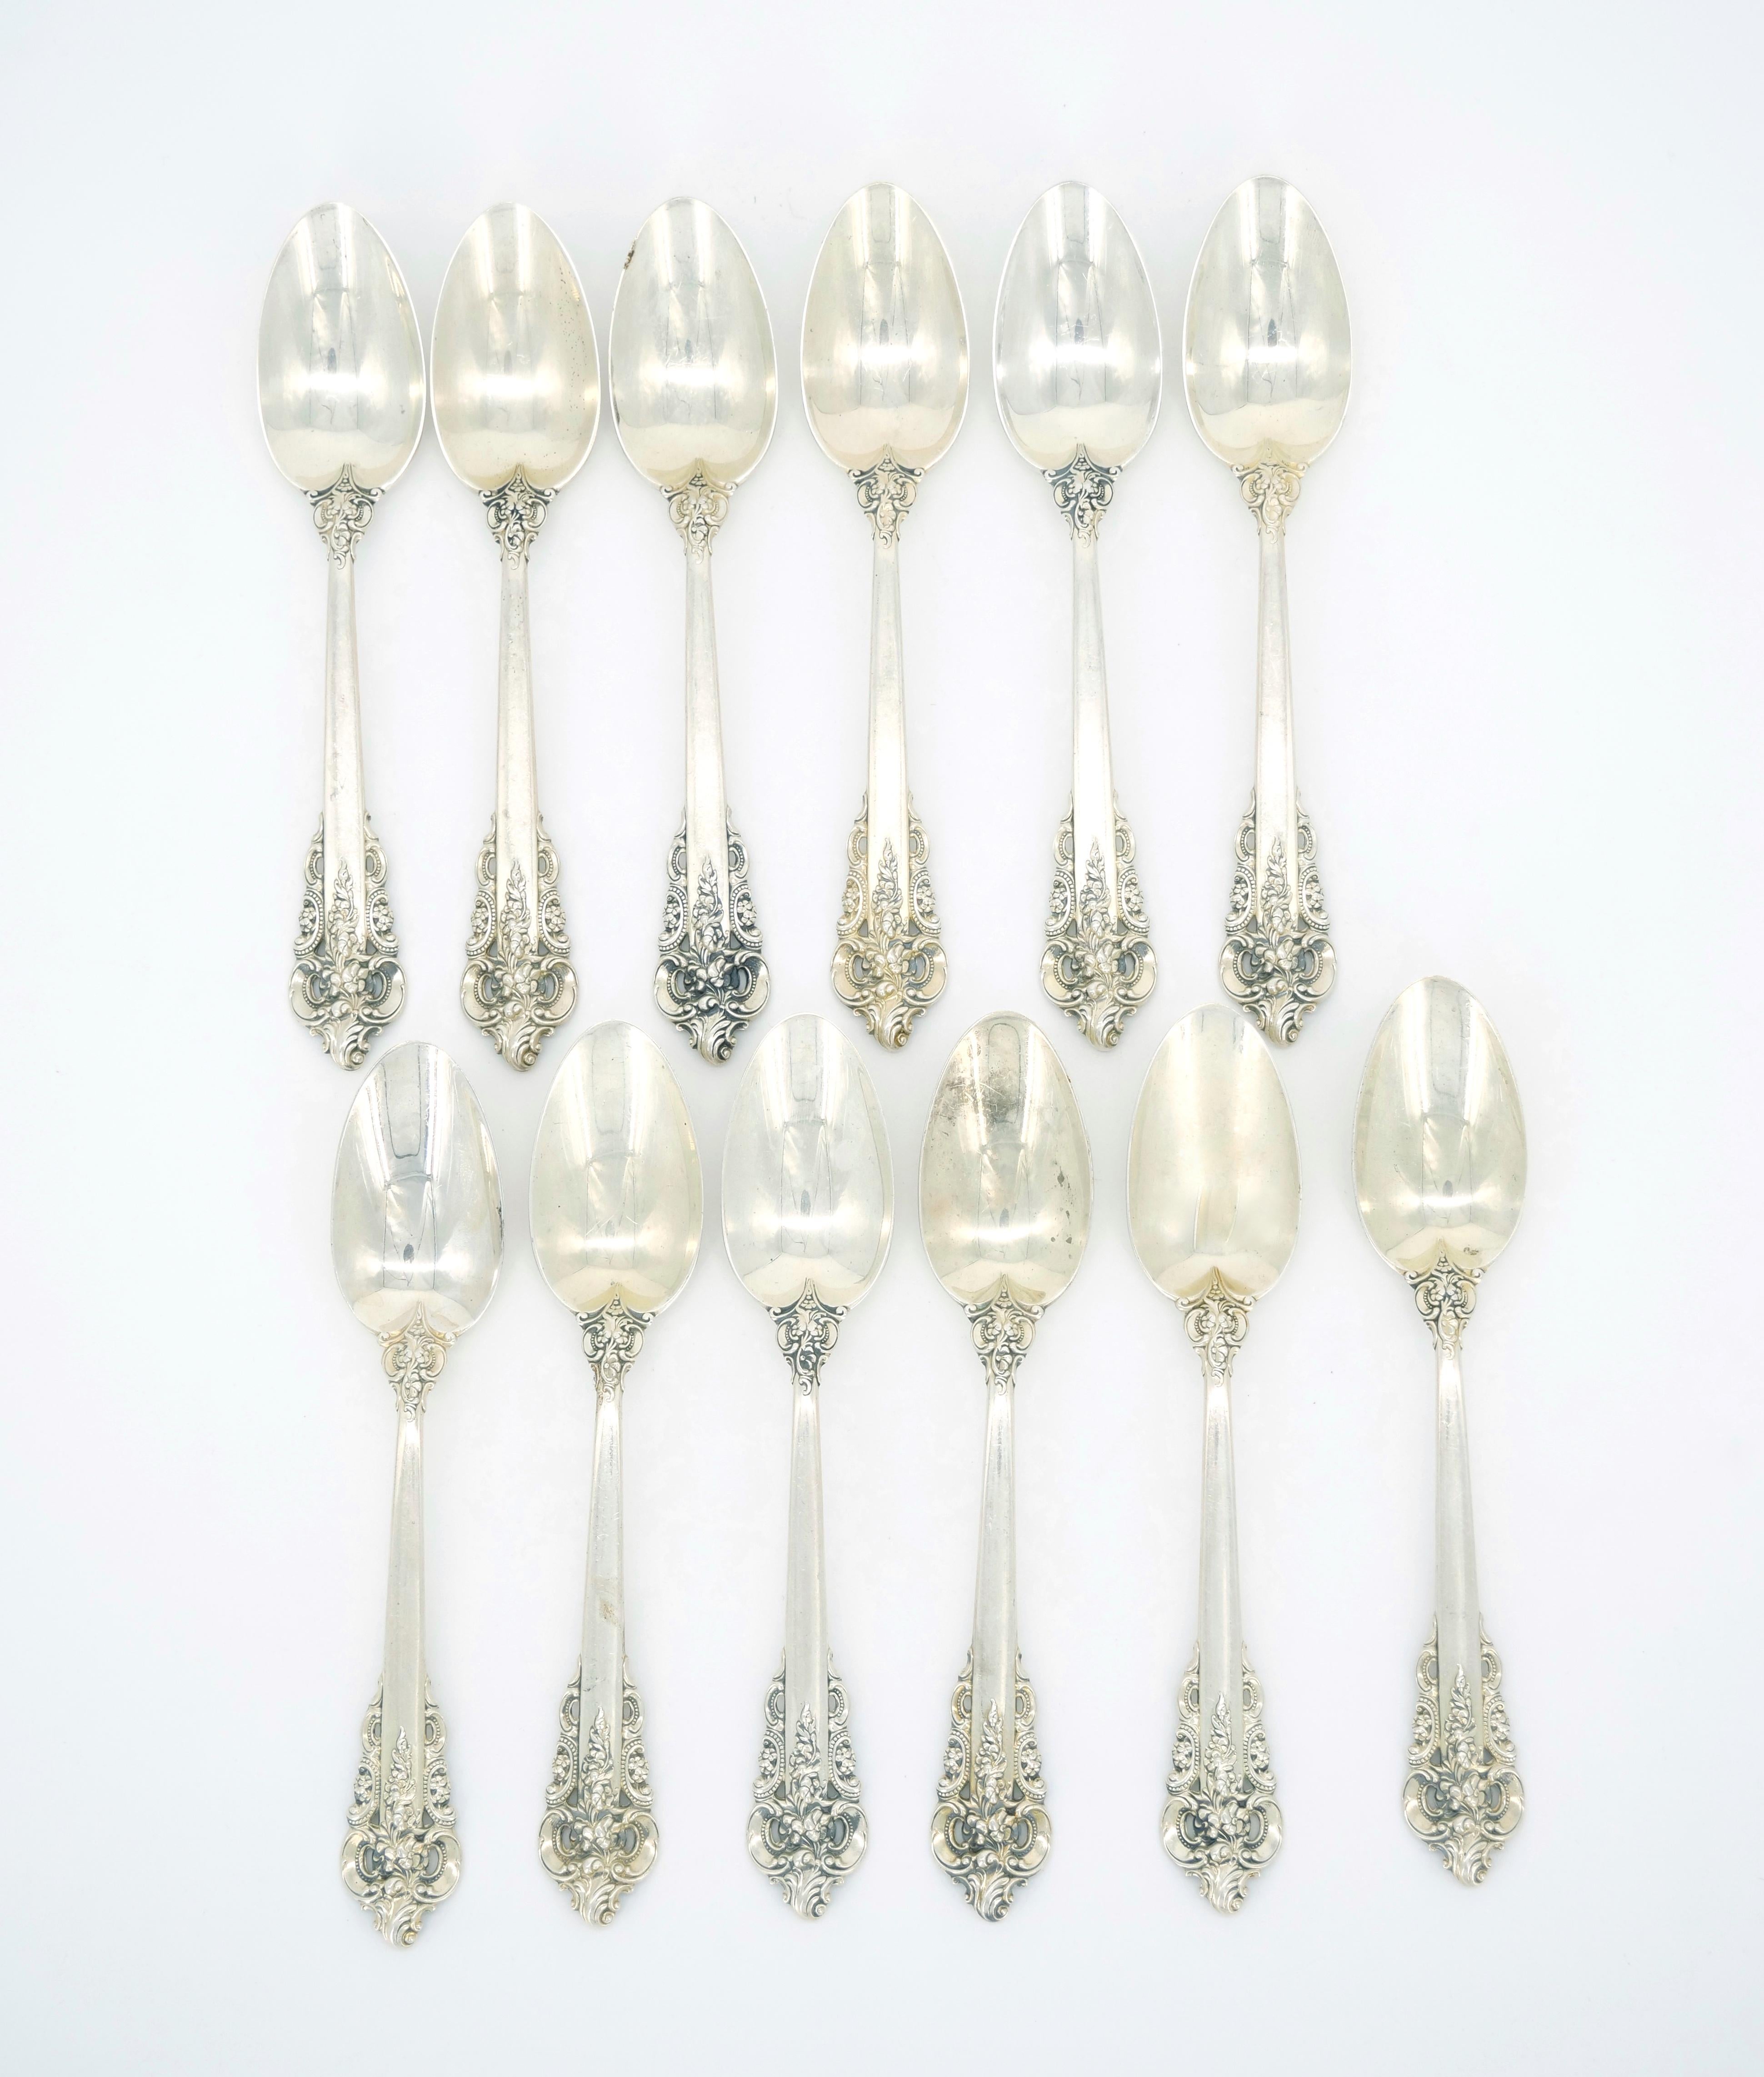 Early 20th Century Sterling Silver Flatware Service For 24 People For Sale 3